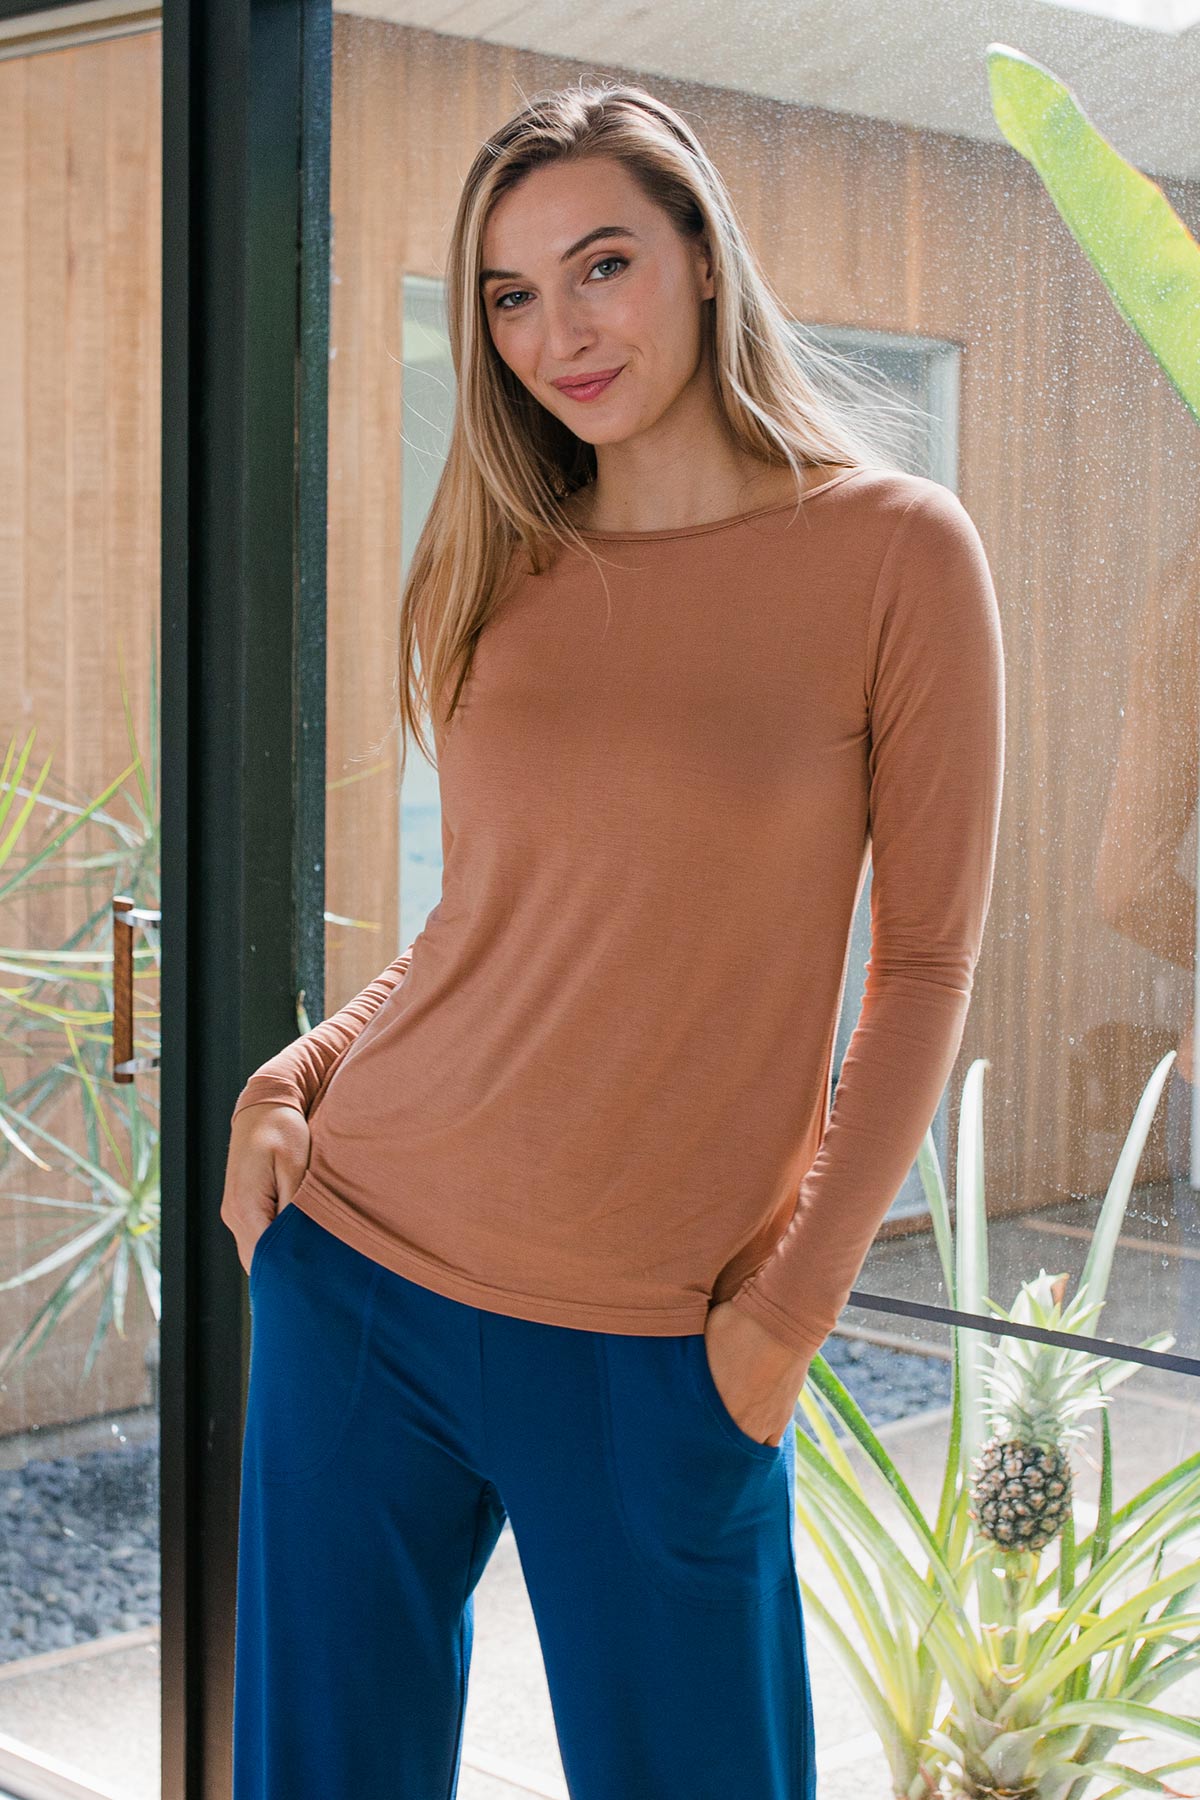 A woman standing and smiling with her hands in her pockets, wearing Yala Jena Long Sleeve Bamboo Tee Shirt in Camel